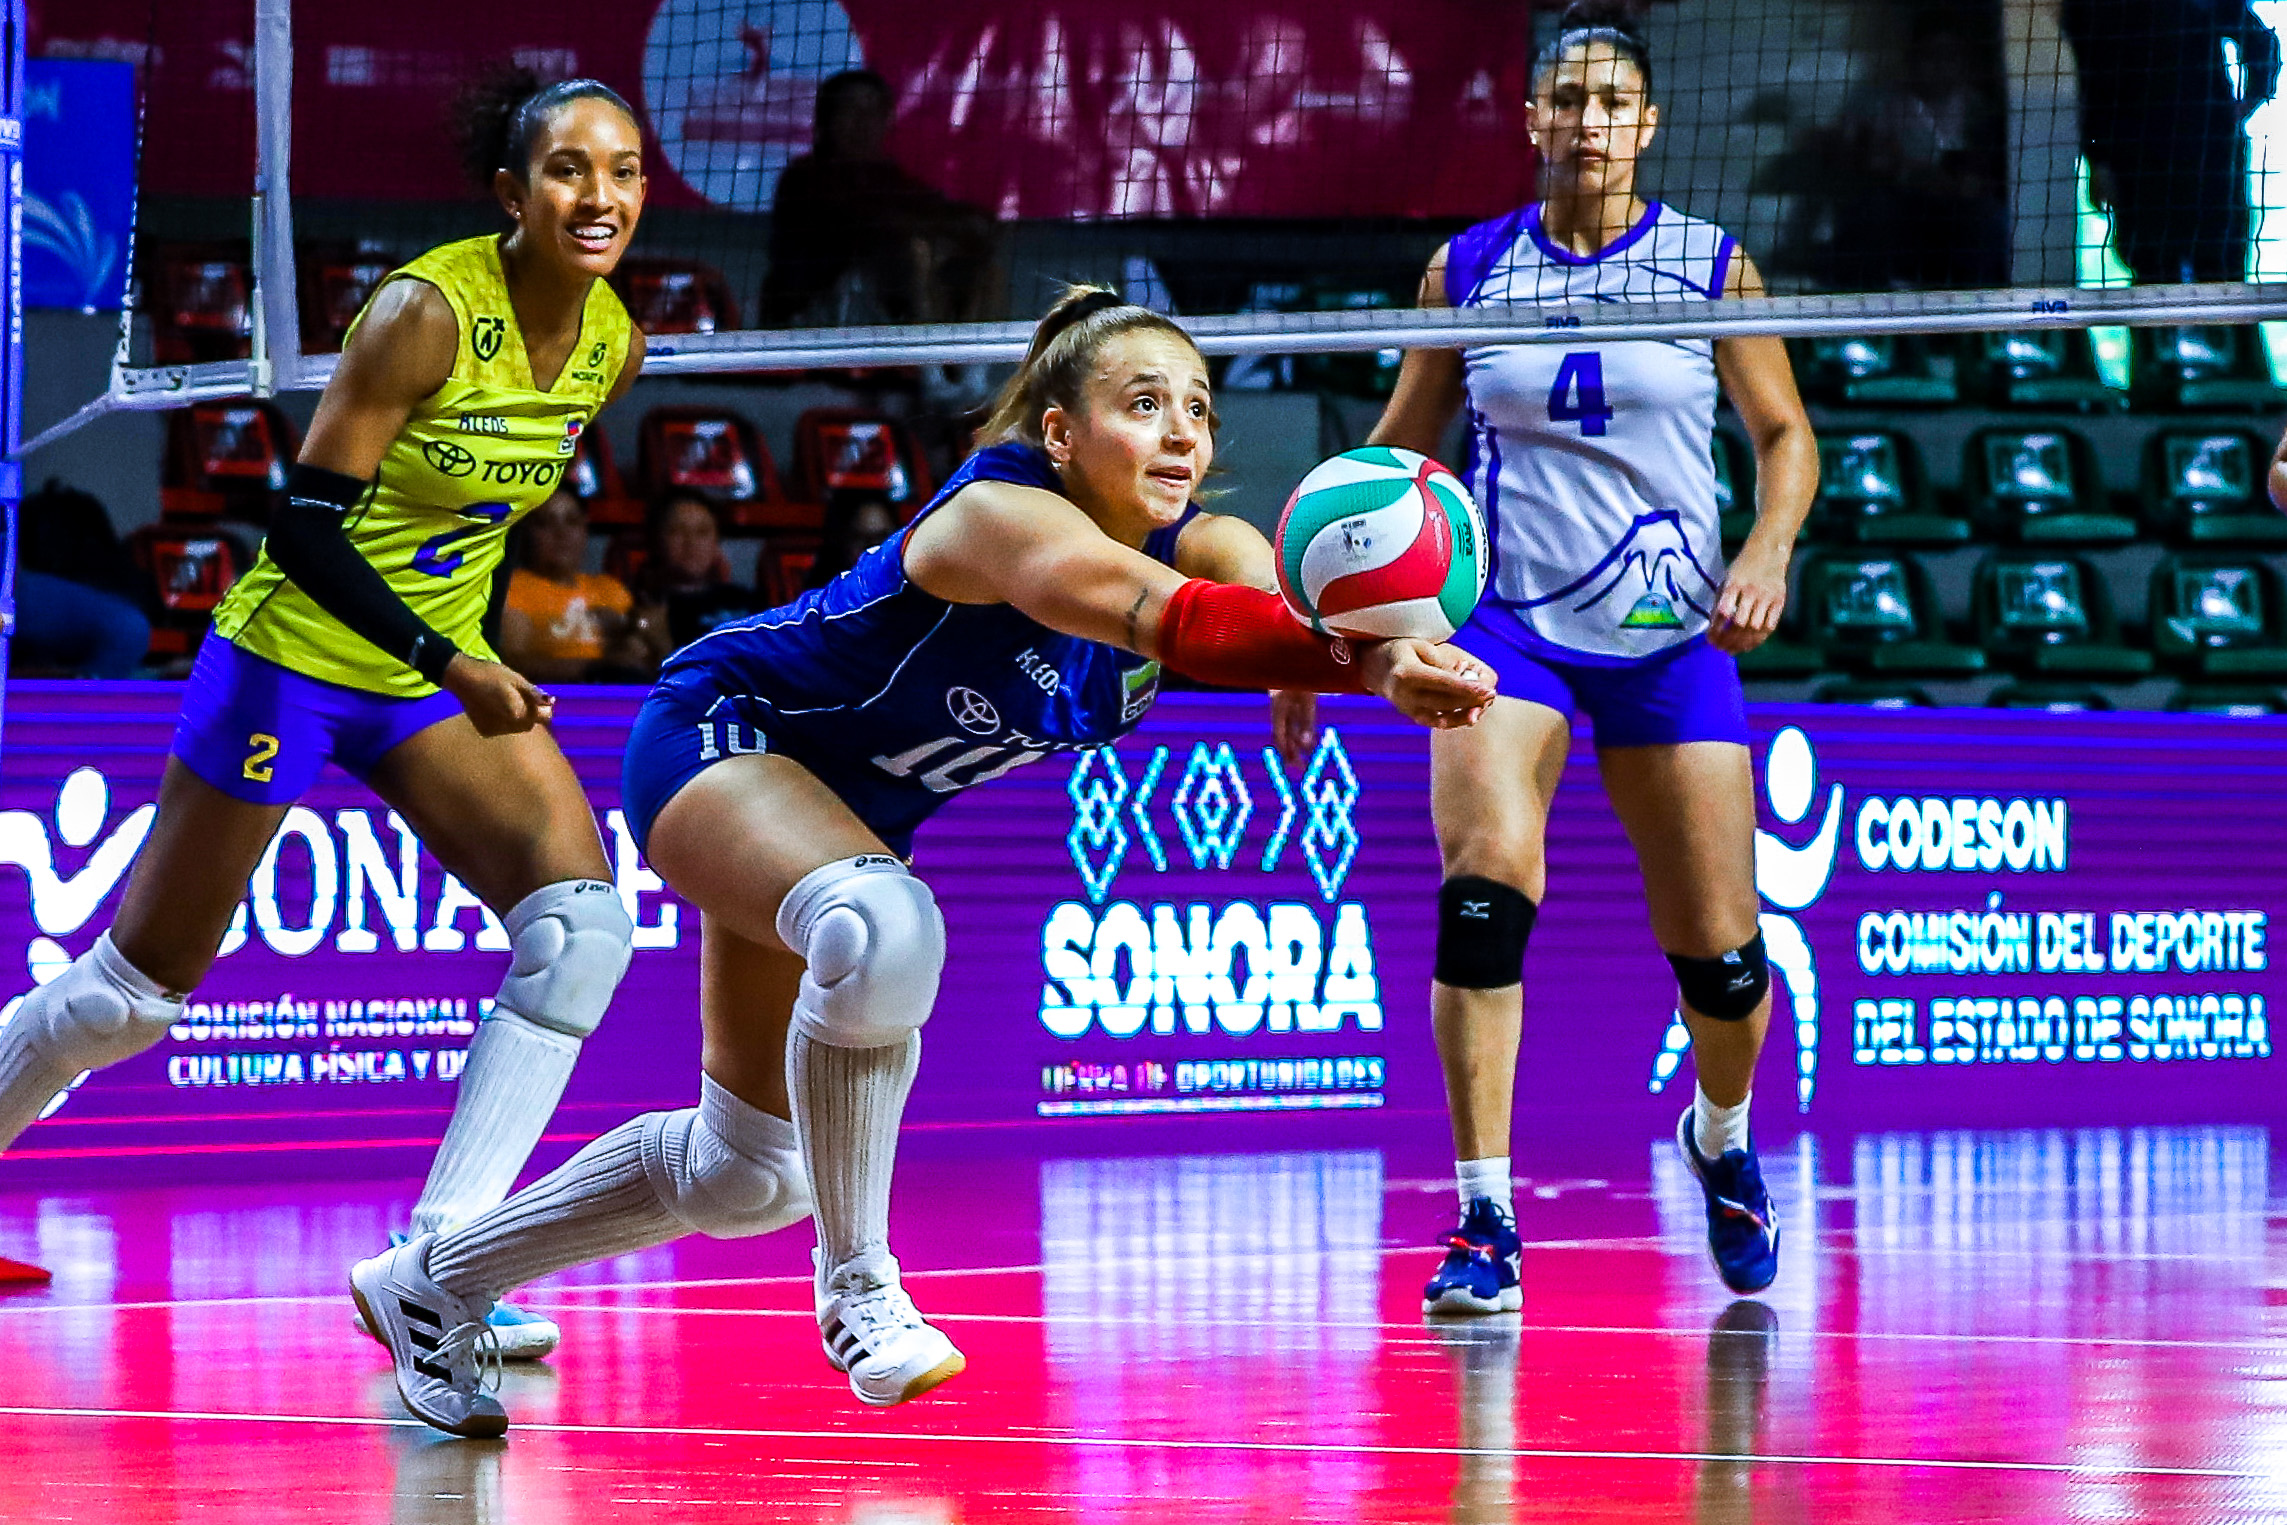 Colombia tops pool B and moves into semifinals